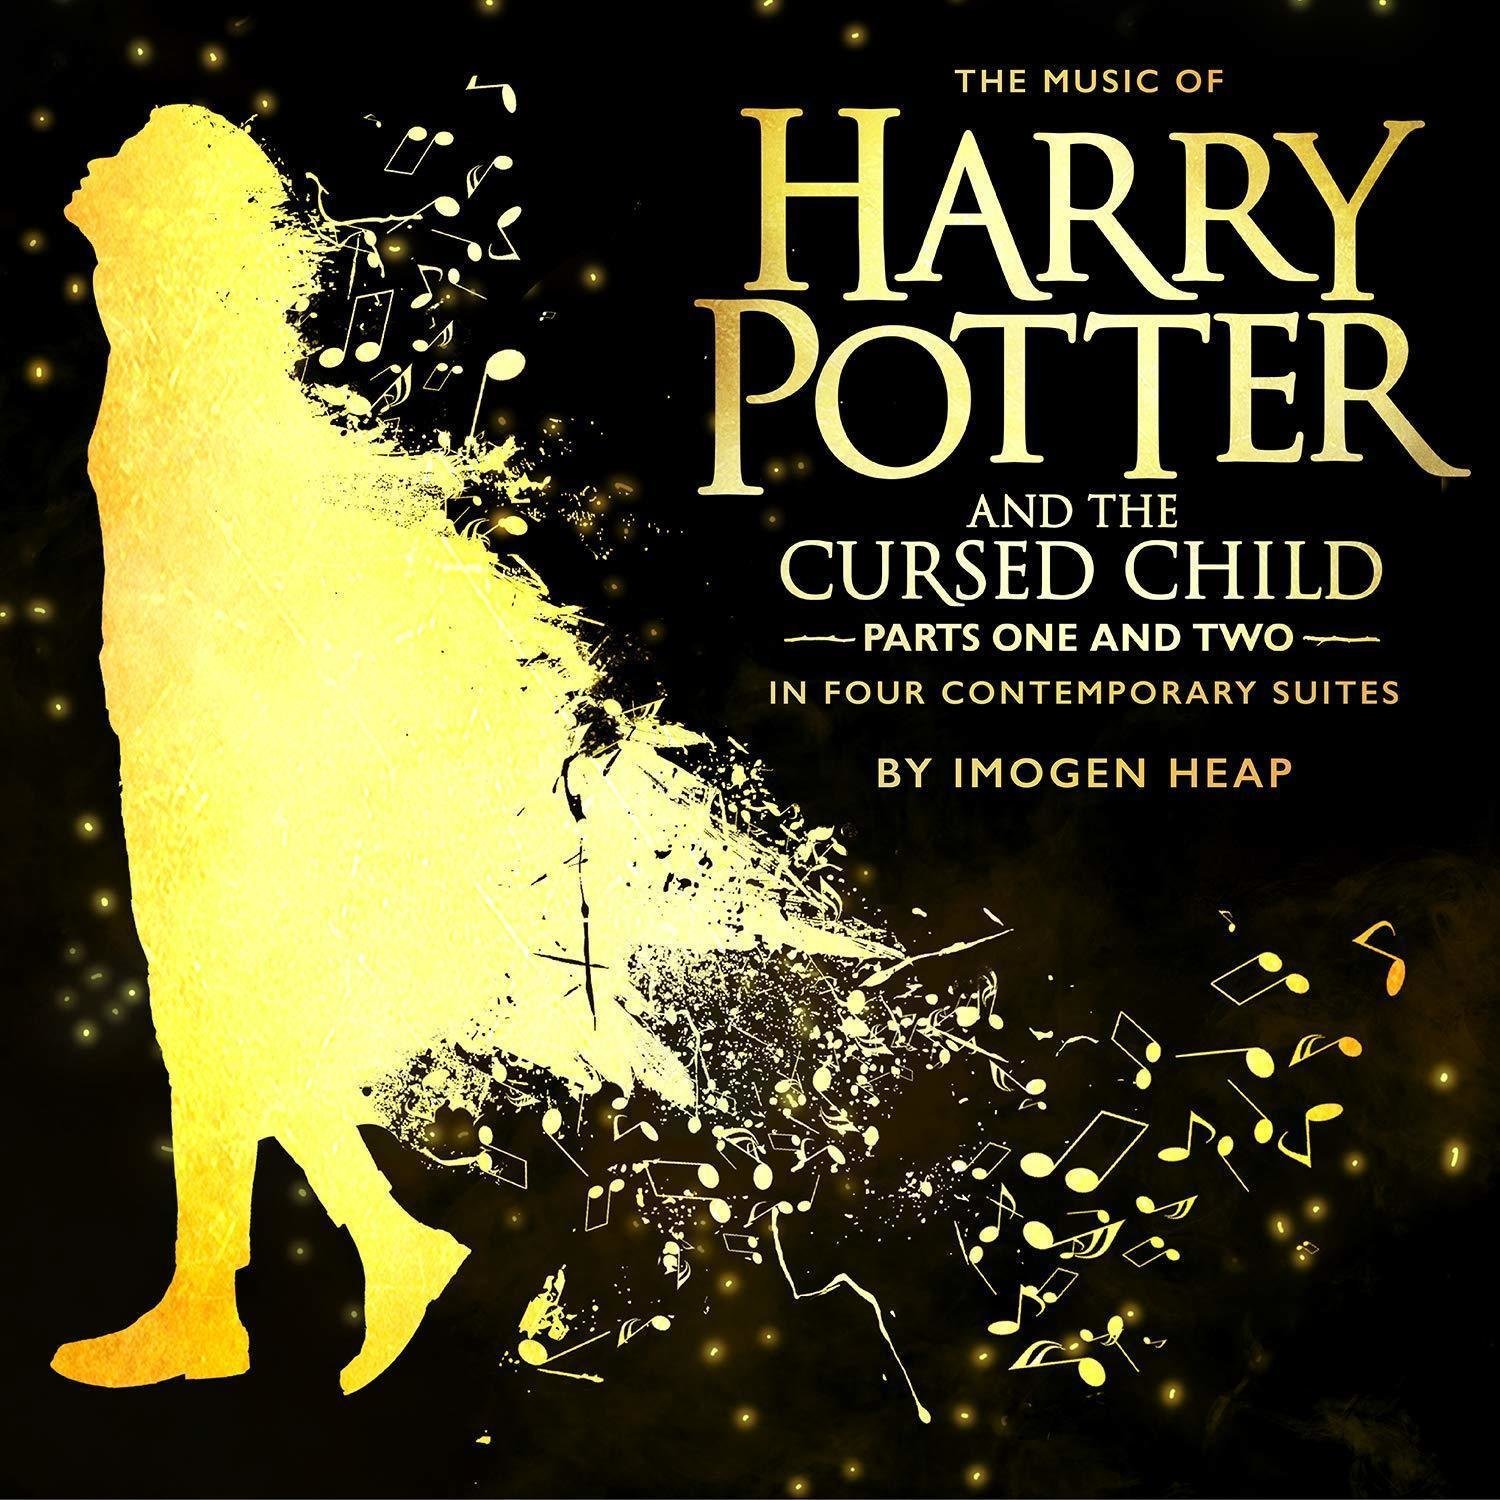 Schallplatte Imogen Heap Music of Harry Potter and the Cursed Child - In Four Contemporary Suites (2 LP)